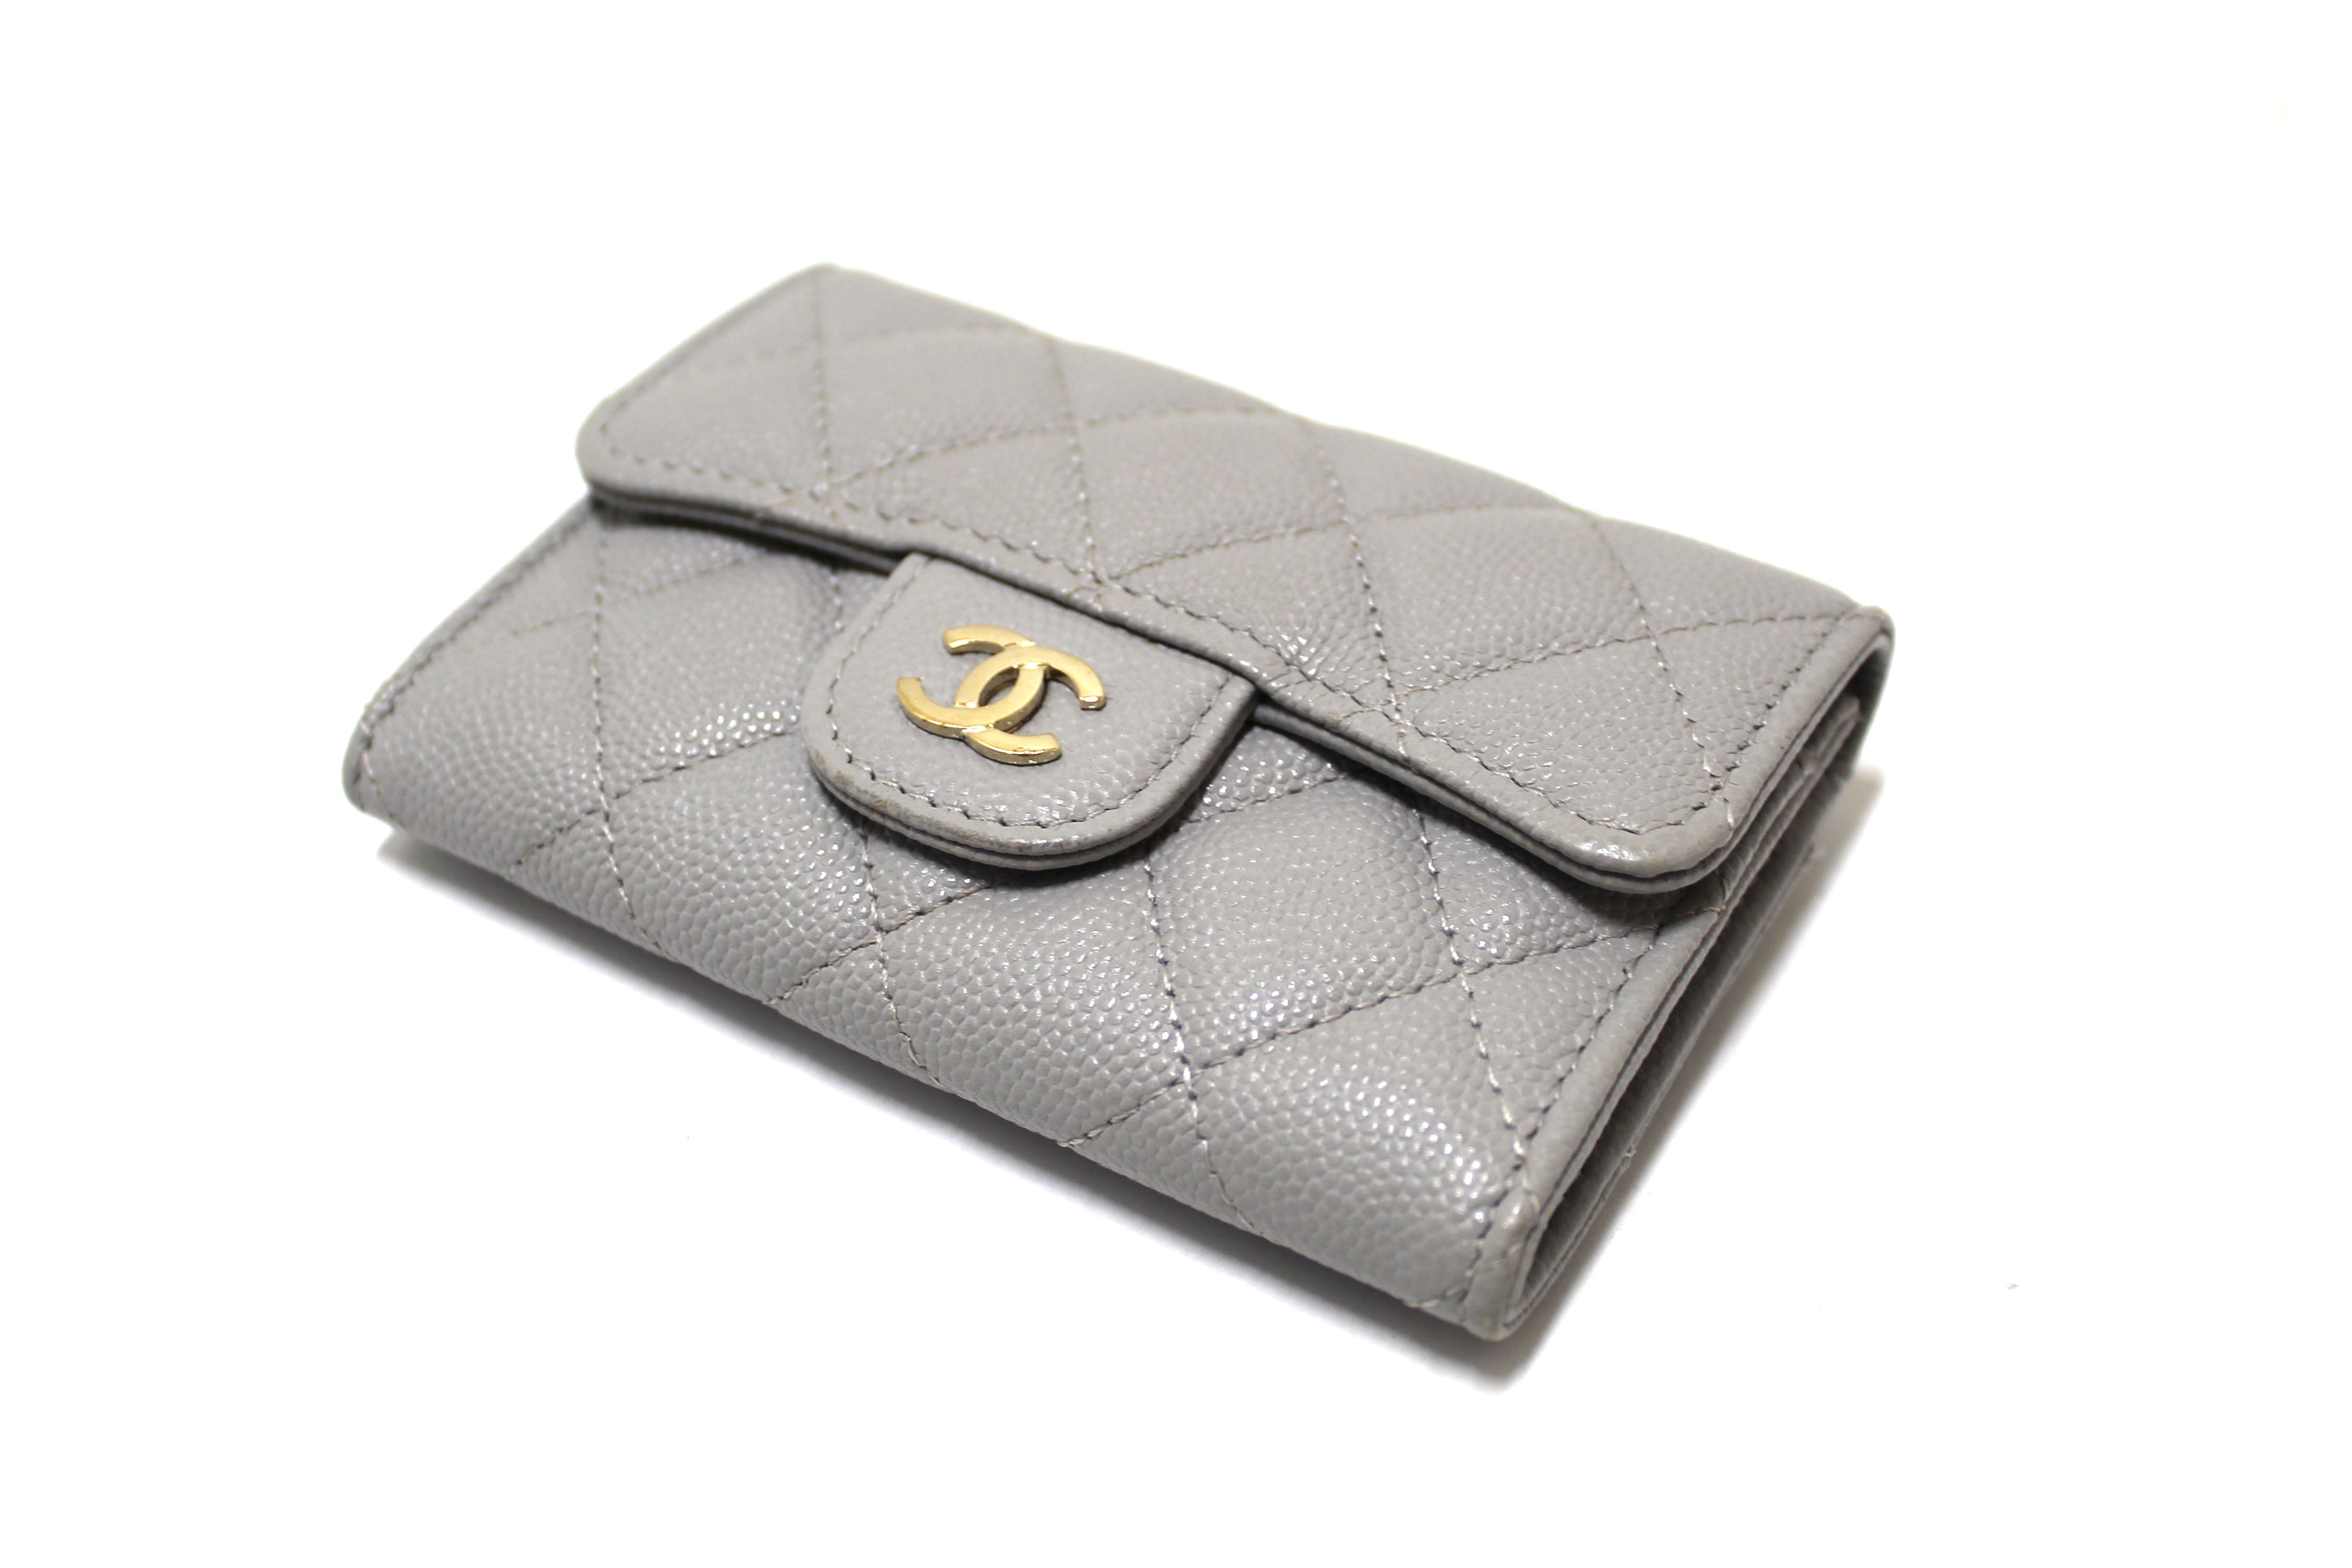 Authentic Chanel Grey Caviar Quilted Leather CC Flap Card Holder